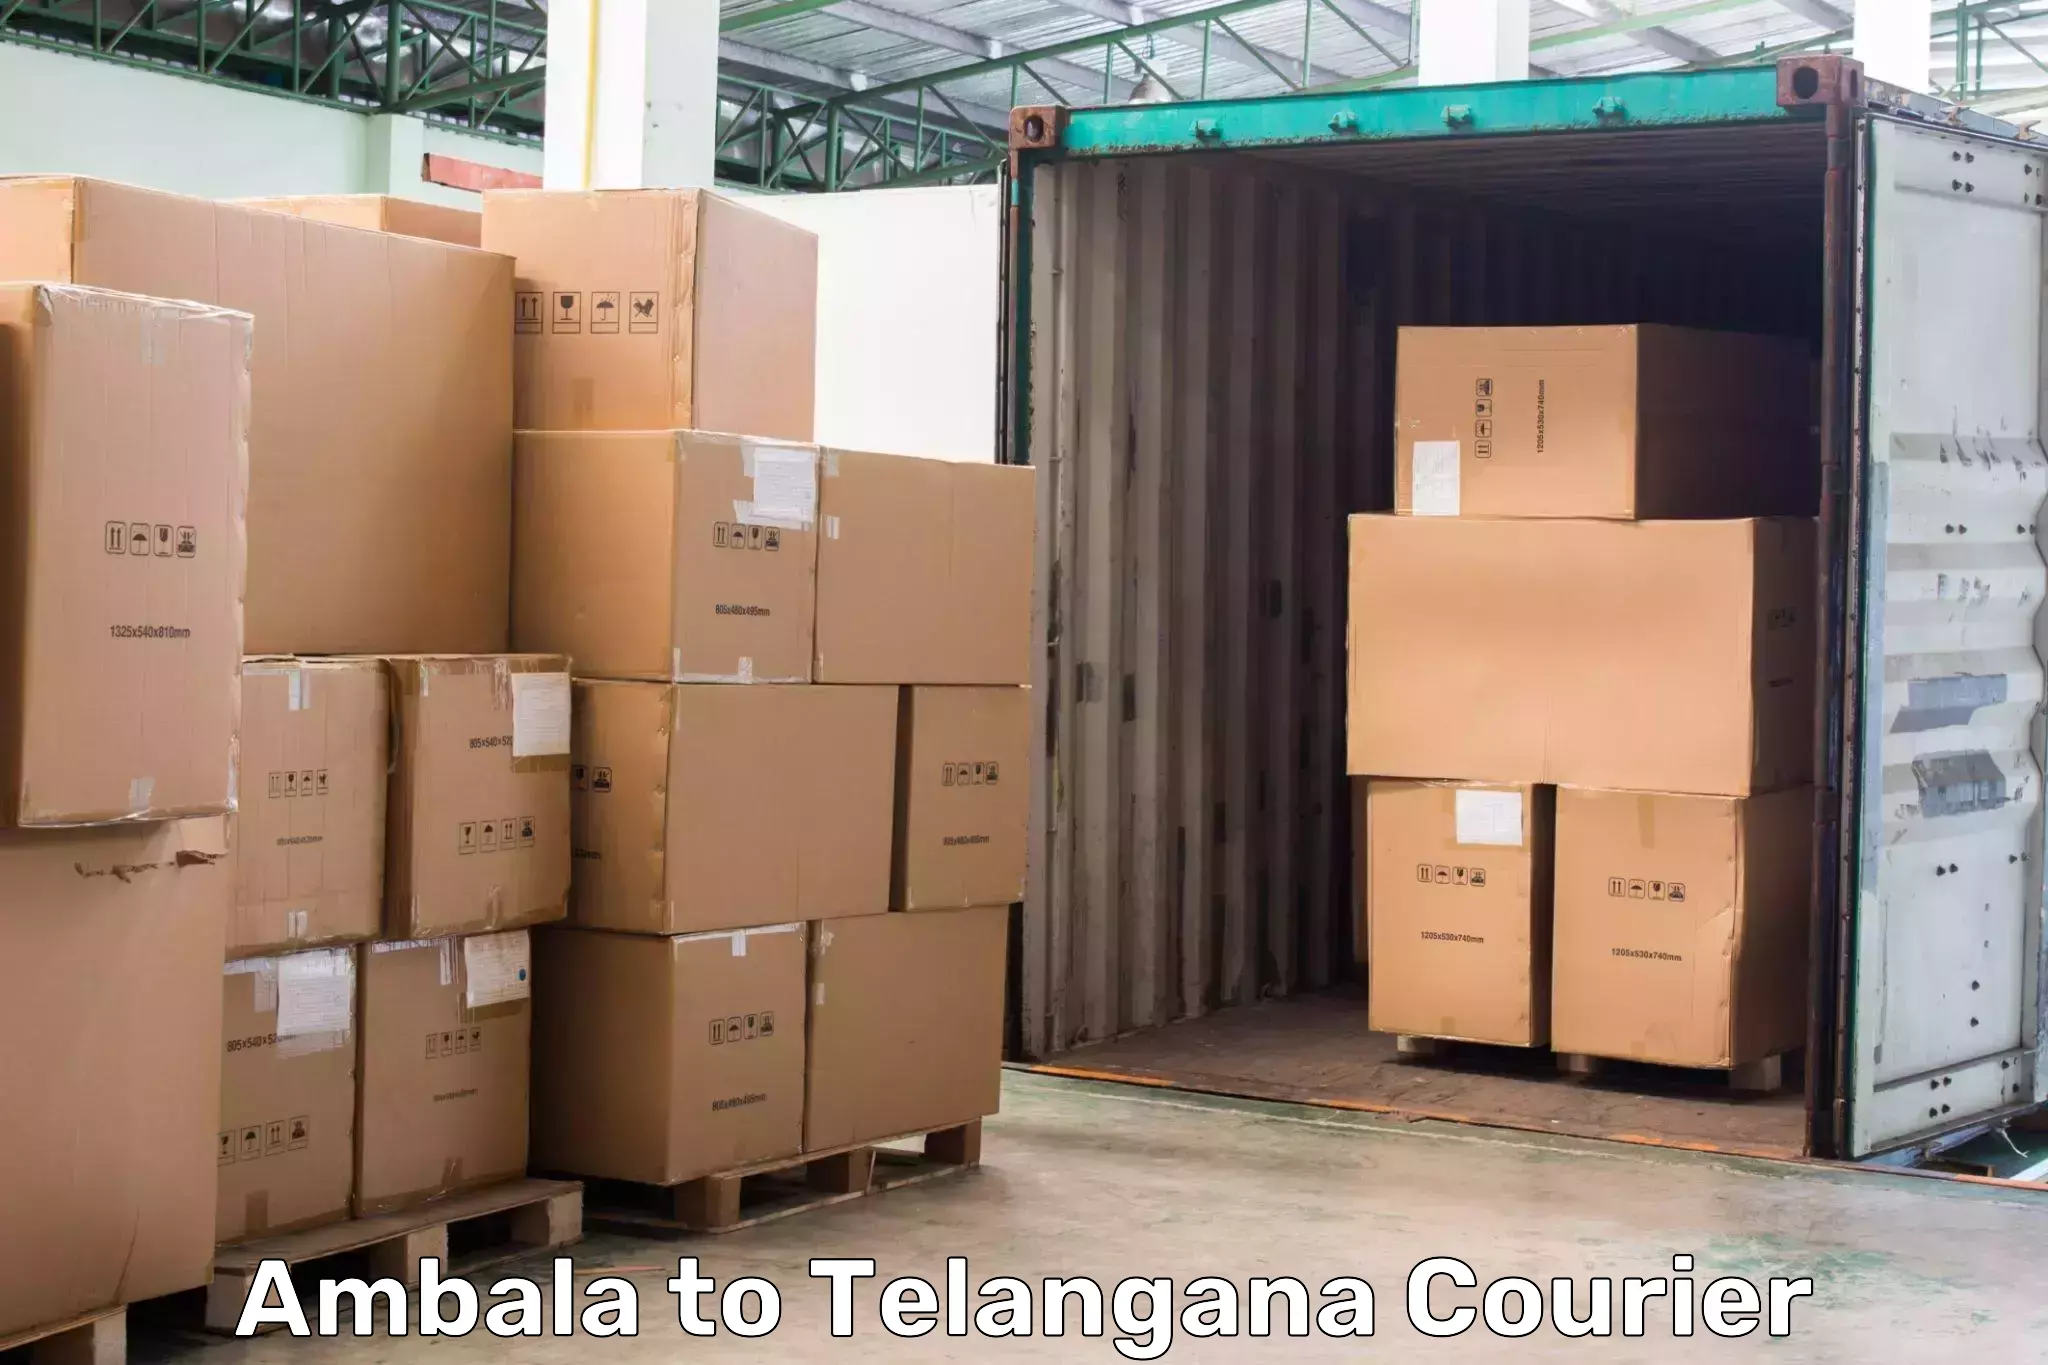 Retail shipping solutions Ambala to Manneguda